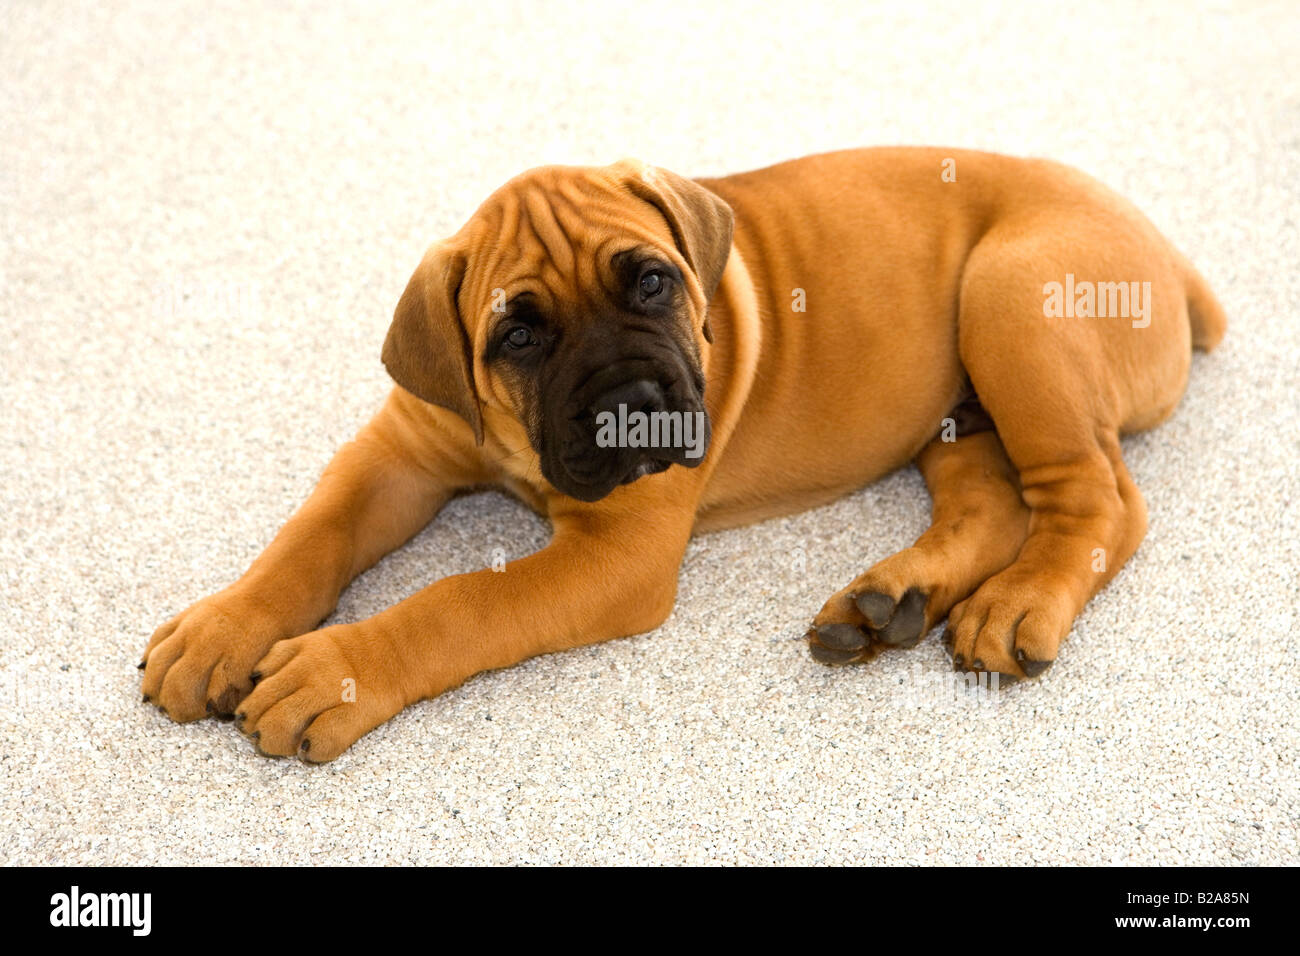 Boerboel High Resolution Stock Photography and Images - Alamy